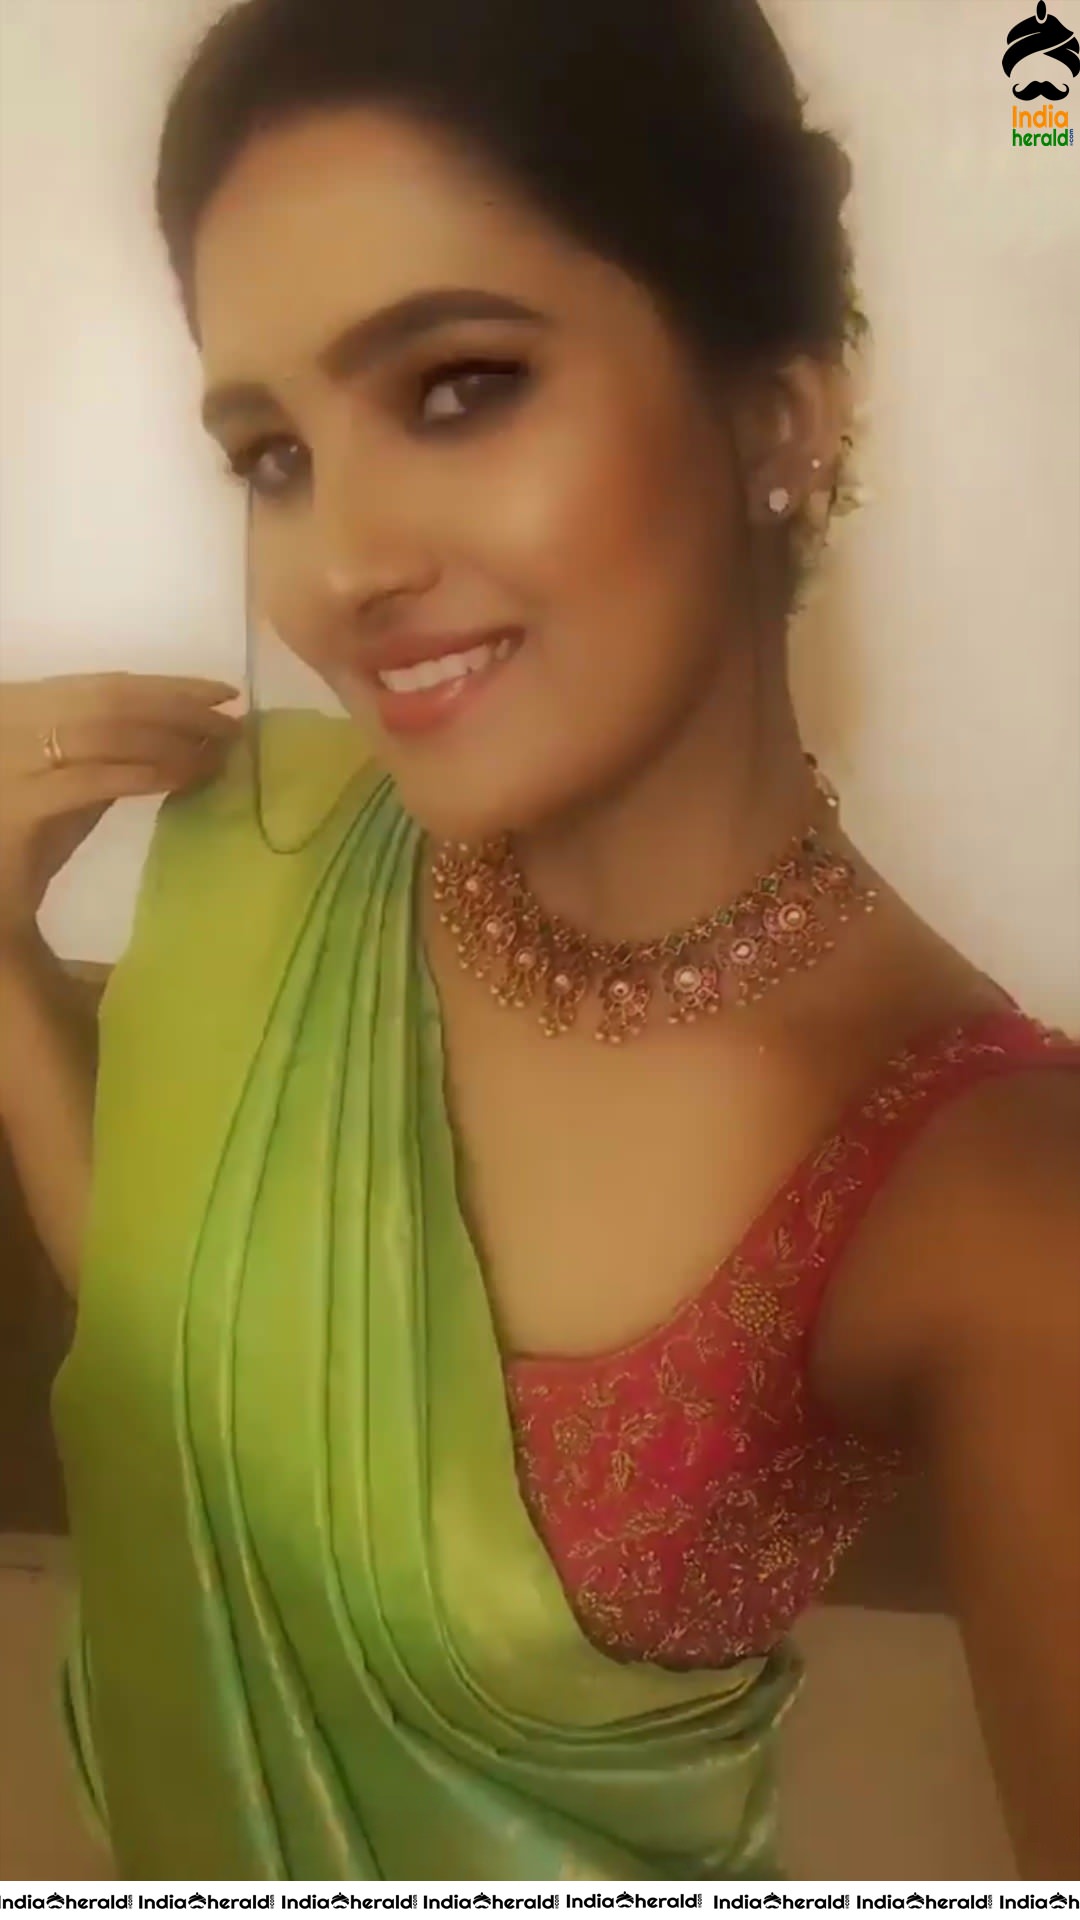 Vani Bhojan looking Vivacious and Sexy in these Hot Saree and Backless Blouse photos